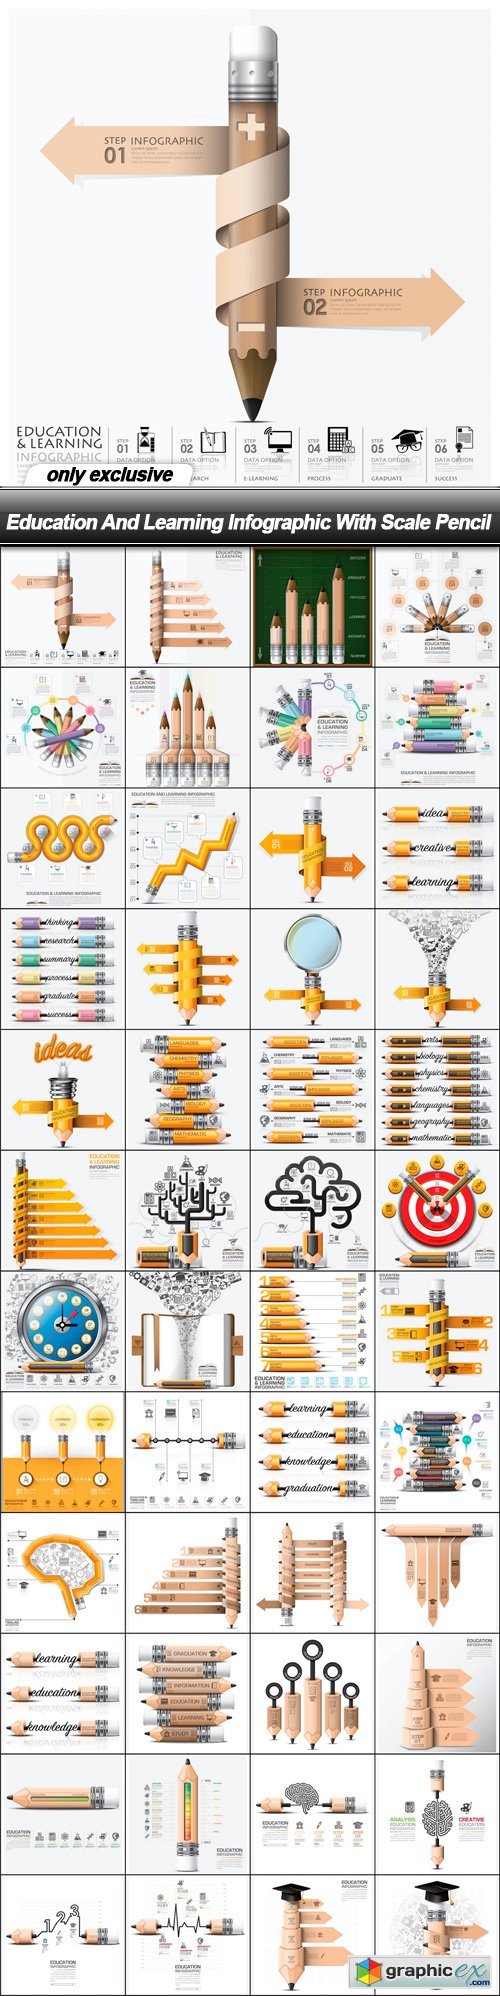 Education And Learning Infographic With Scale Pencil - 48 EPS